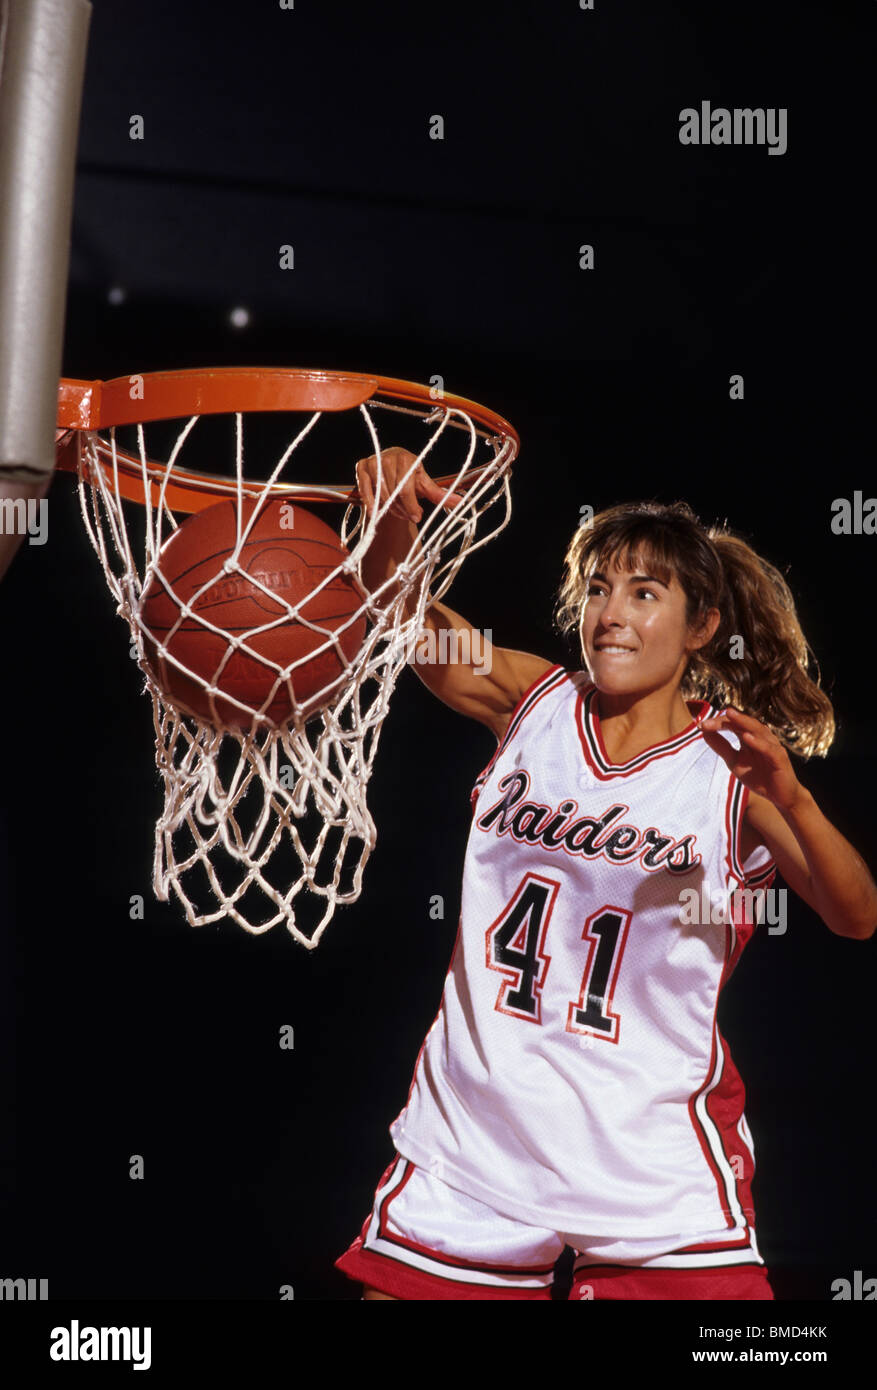 Female basketball player dunking a ball through the hoop Stock Photo - Alamy